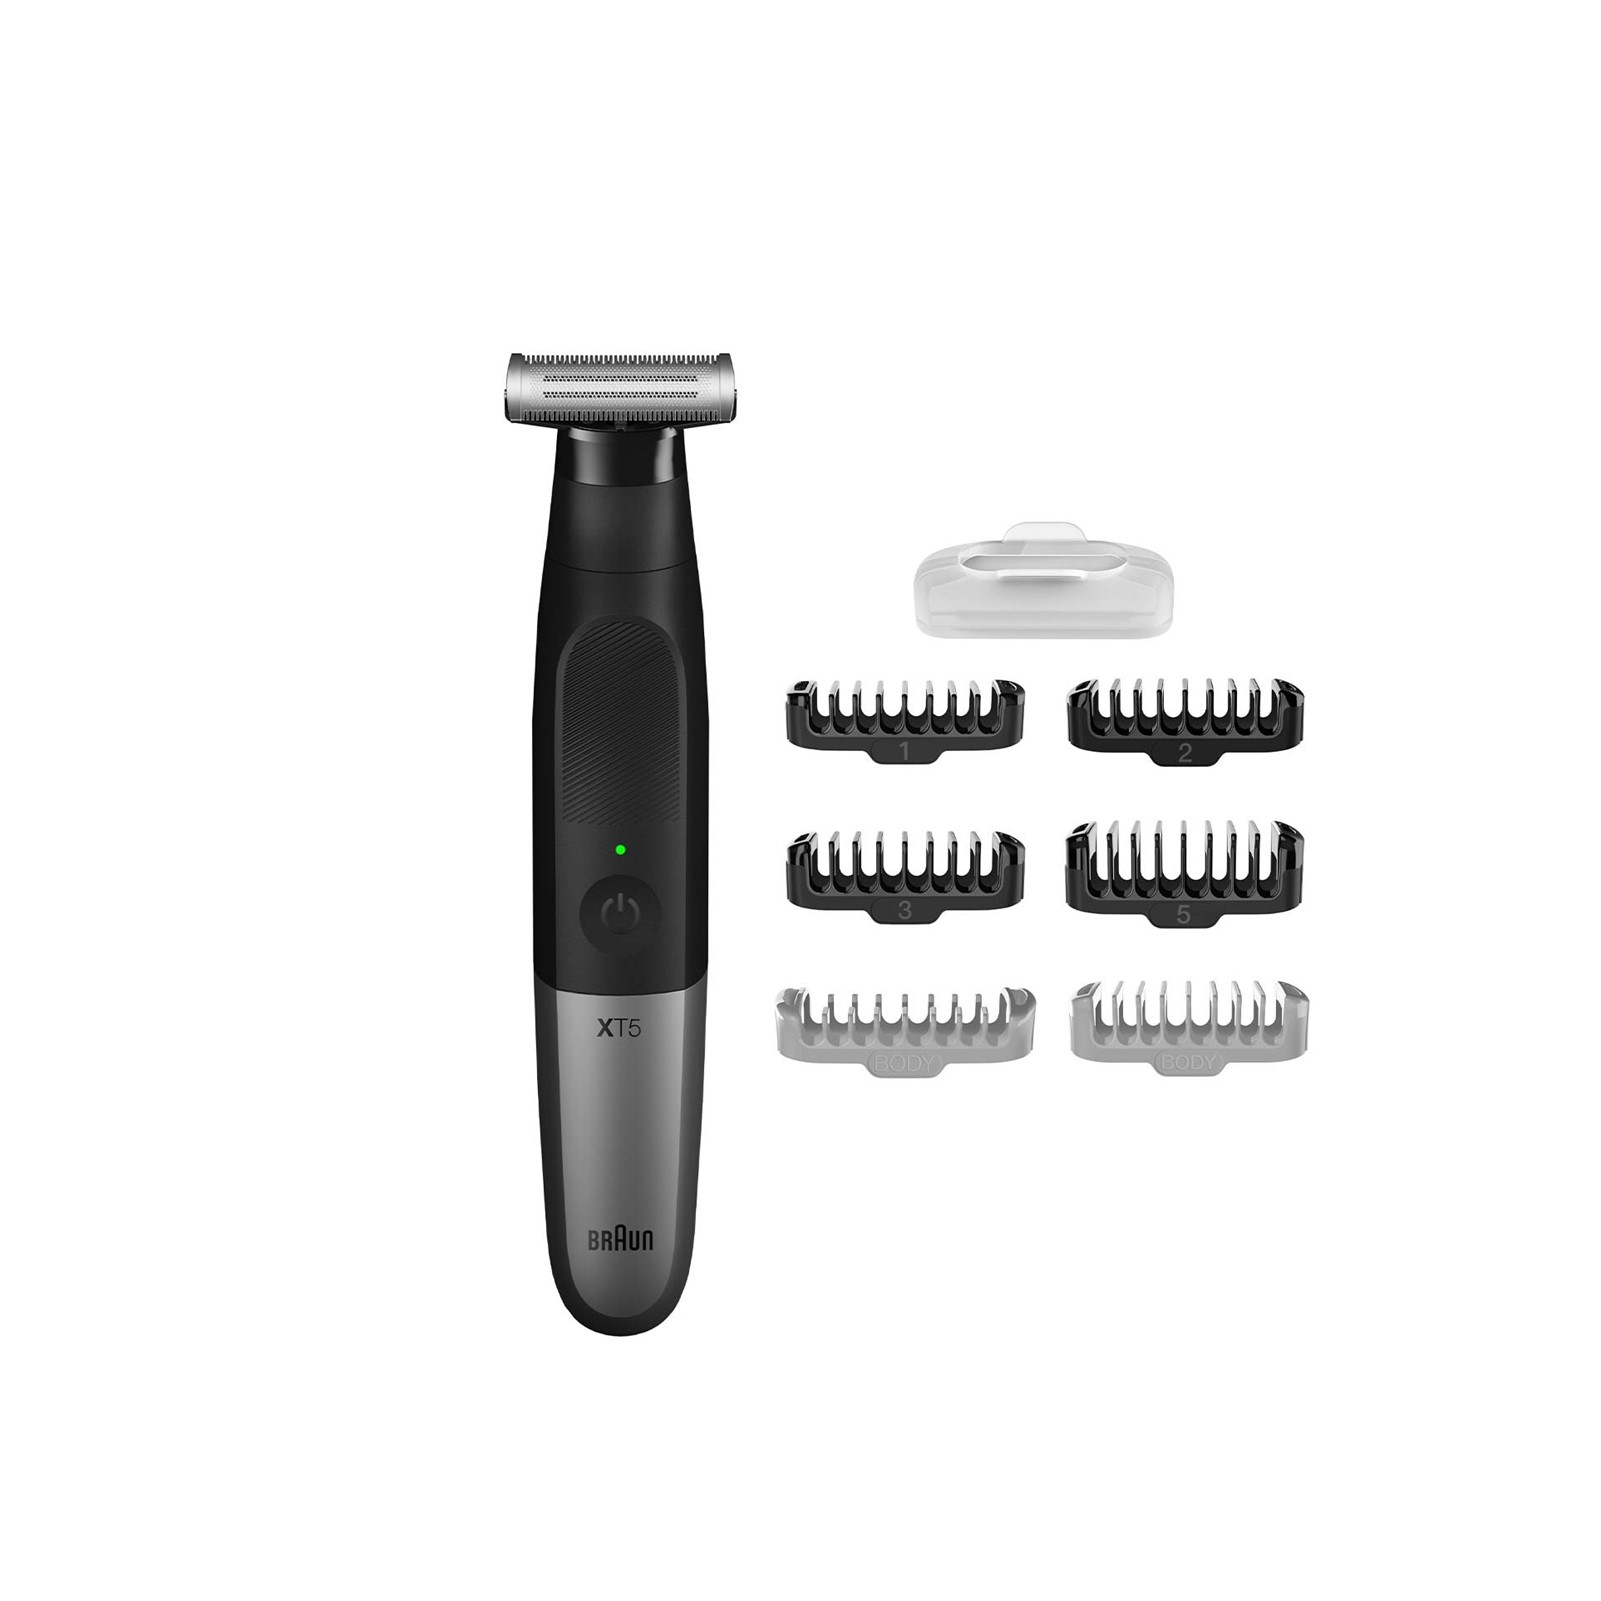 https://static.beautytocare.com/media/catalog/product/b/r/braun-one-tool-shave-trim-style-face-body-xt5.jpg